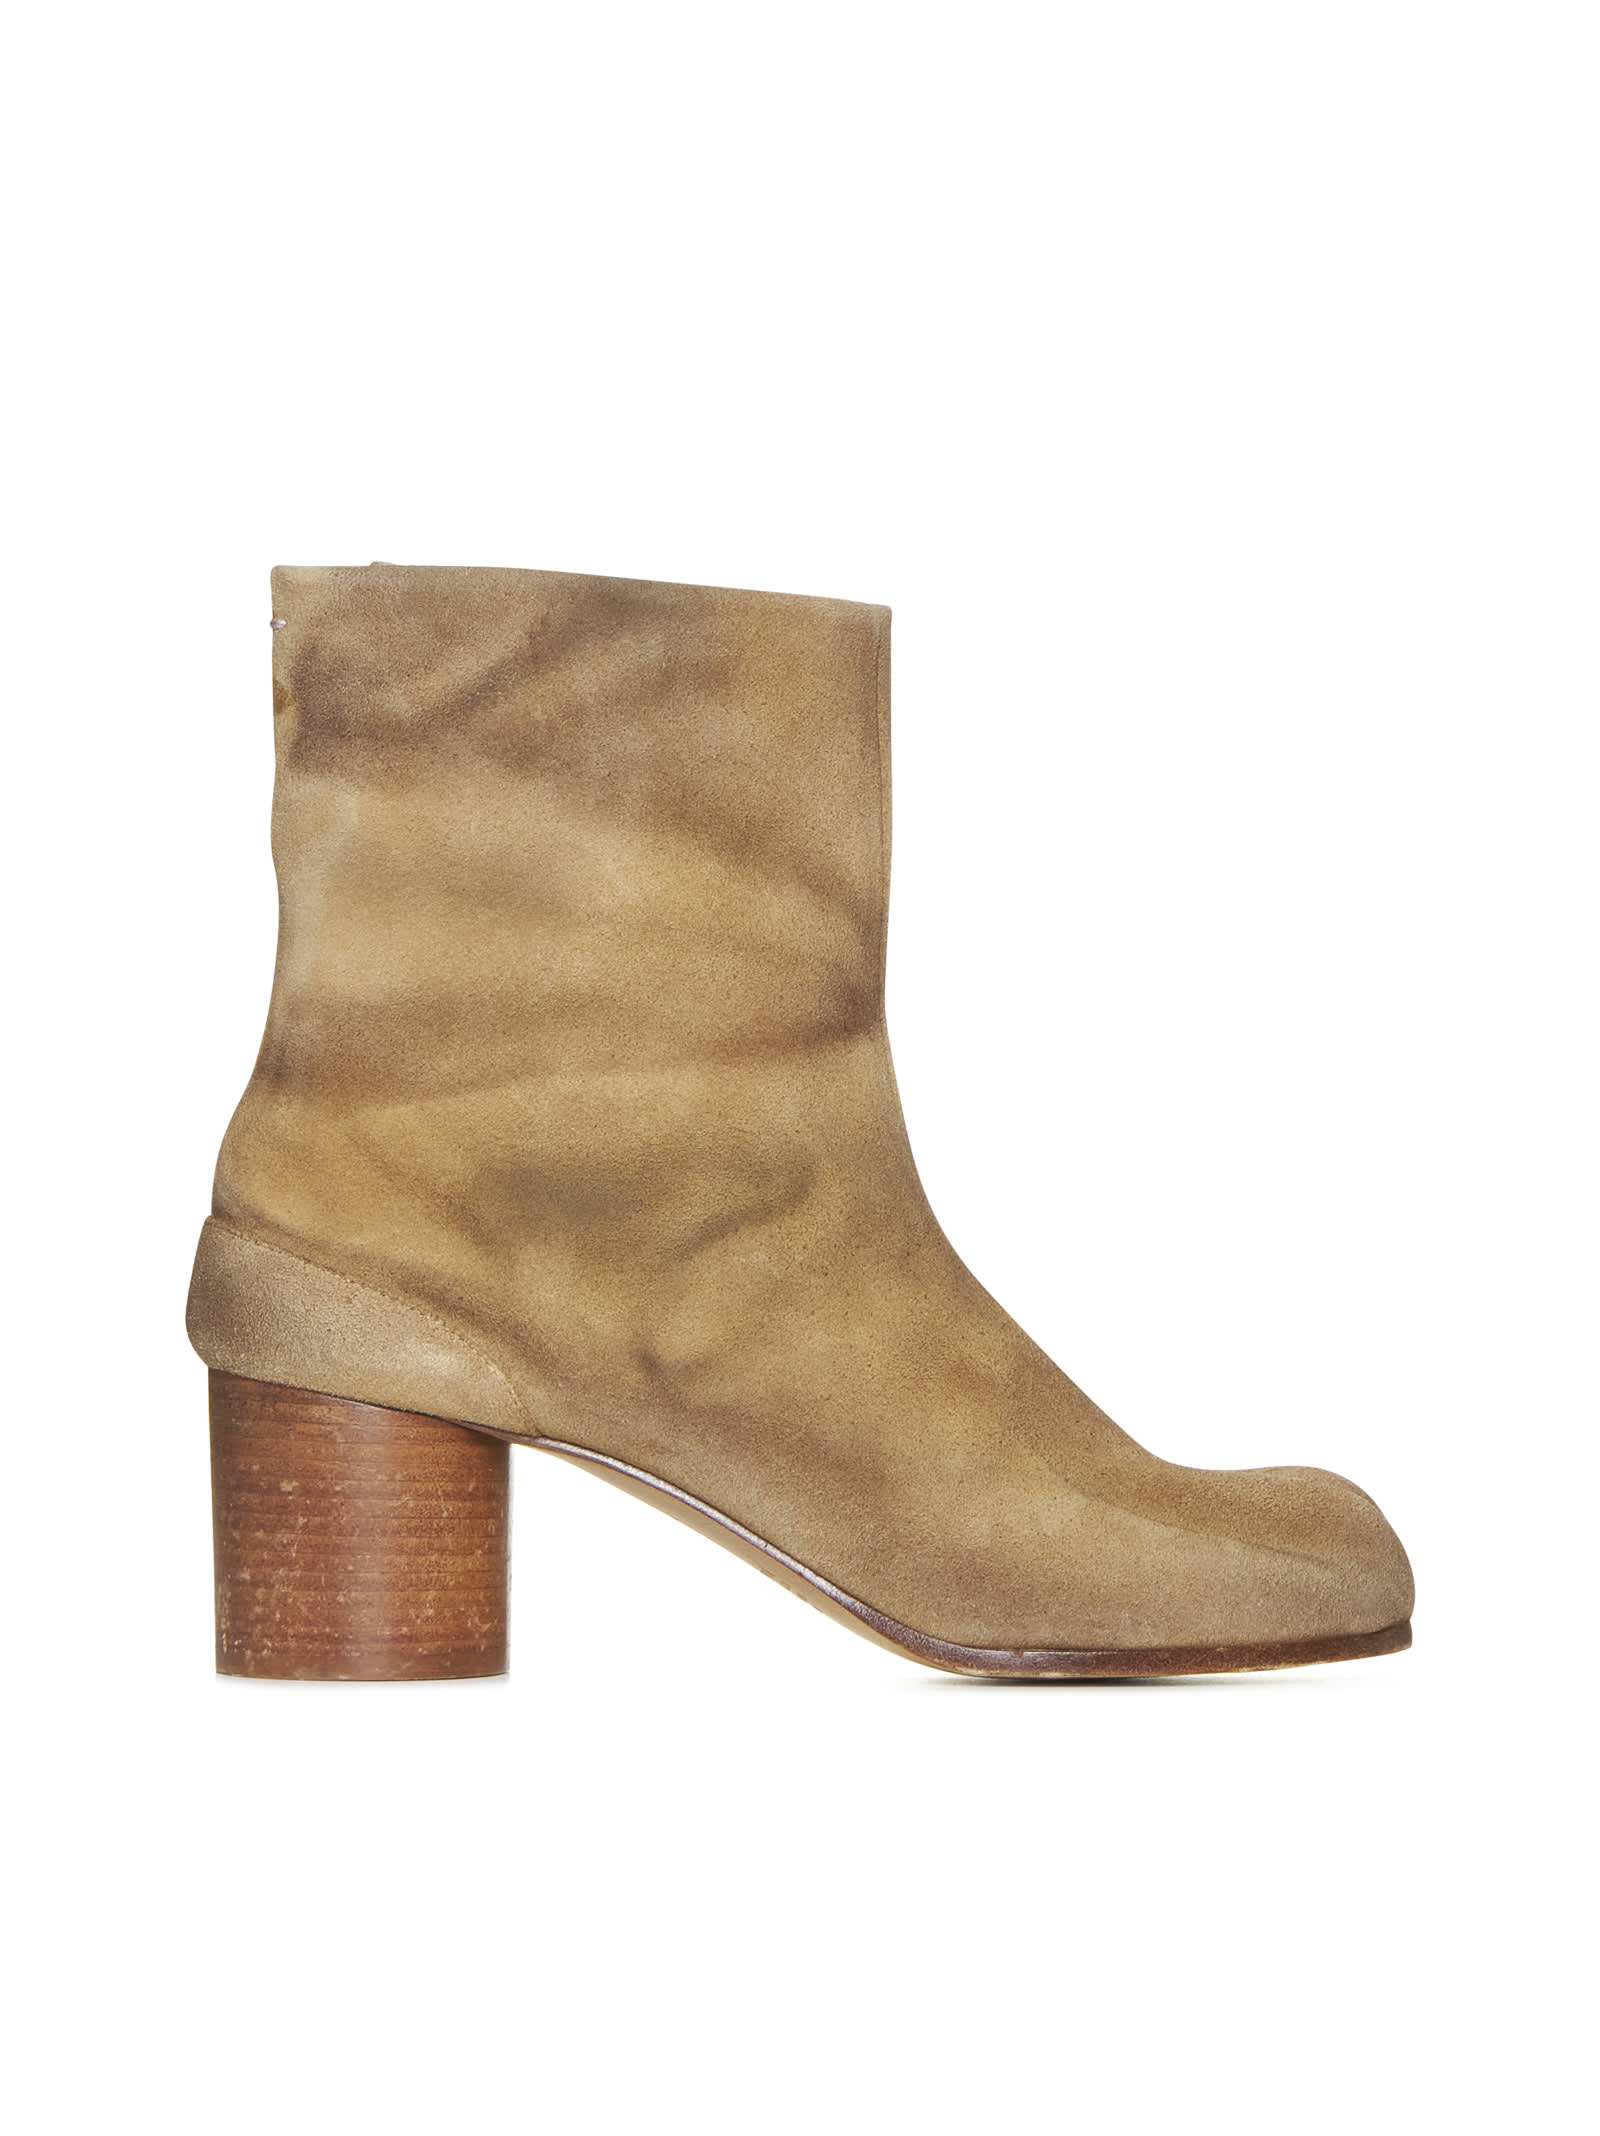 Tabi Ankle Boots In Camel Suede